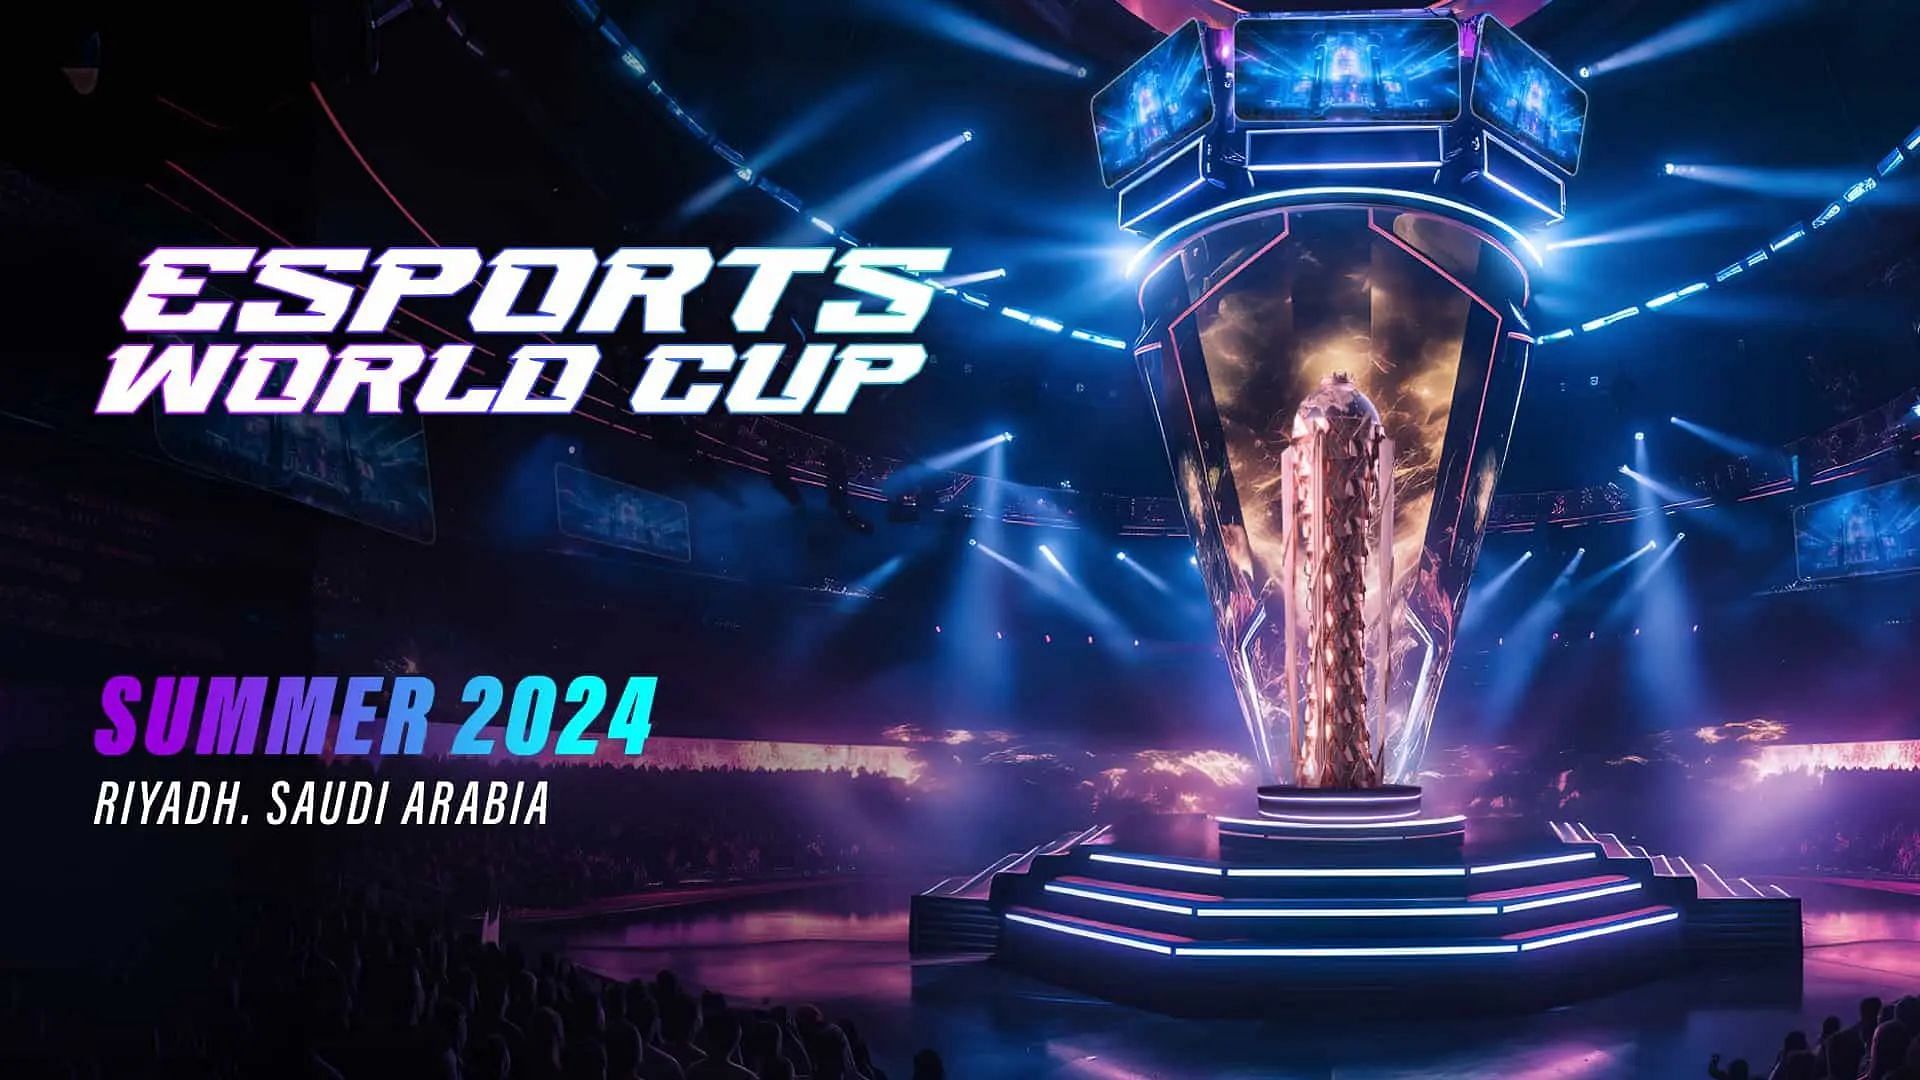 PUBG Mobile World Cup 2024 will be held this summer in Riyadh, Saudi Arabia (Image via Esports World Cup)